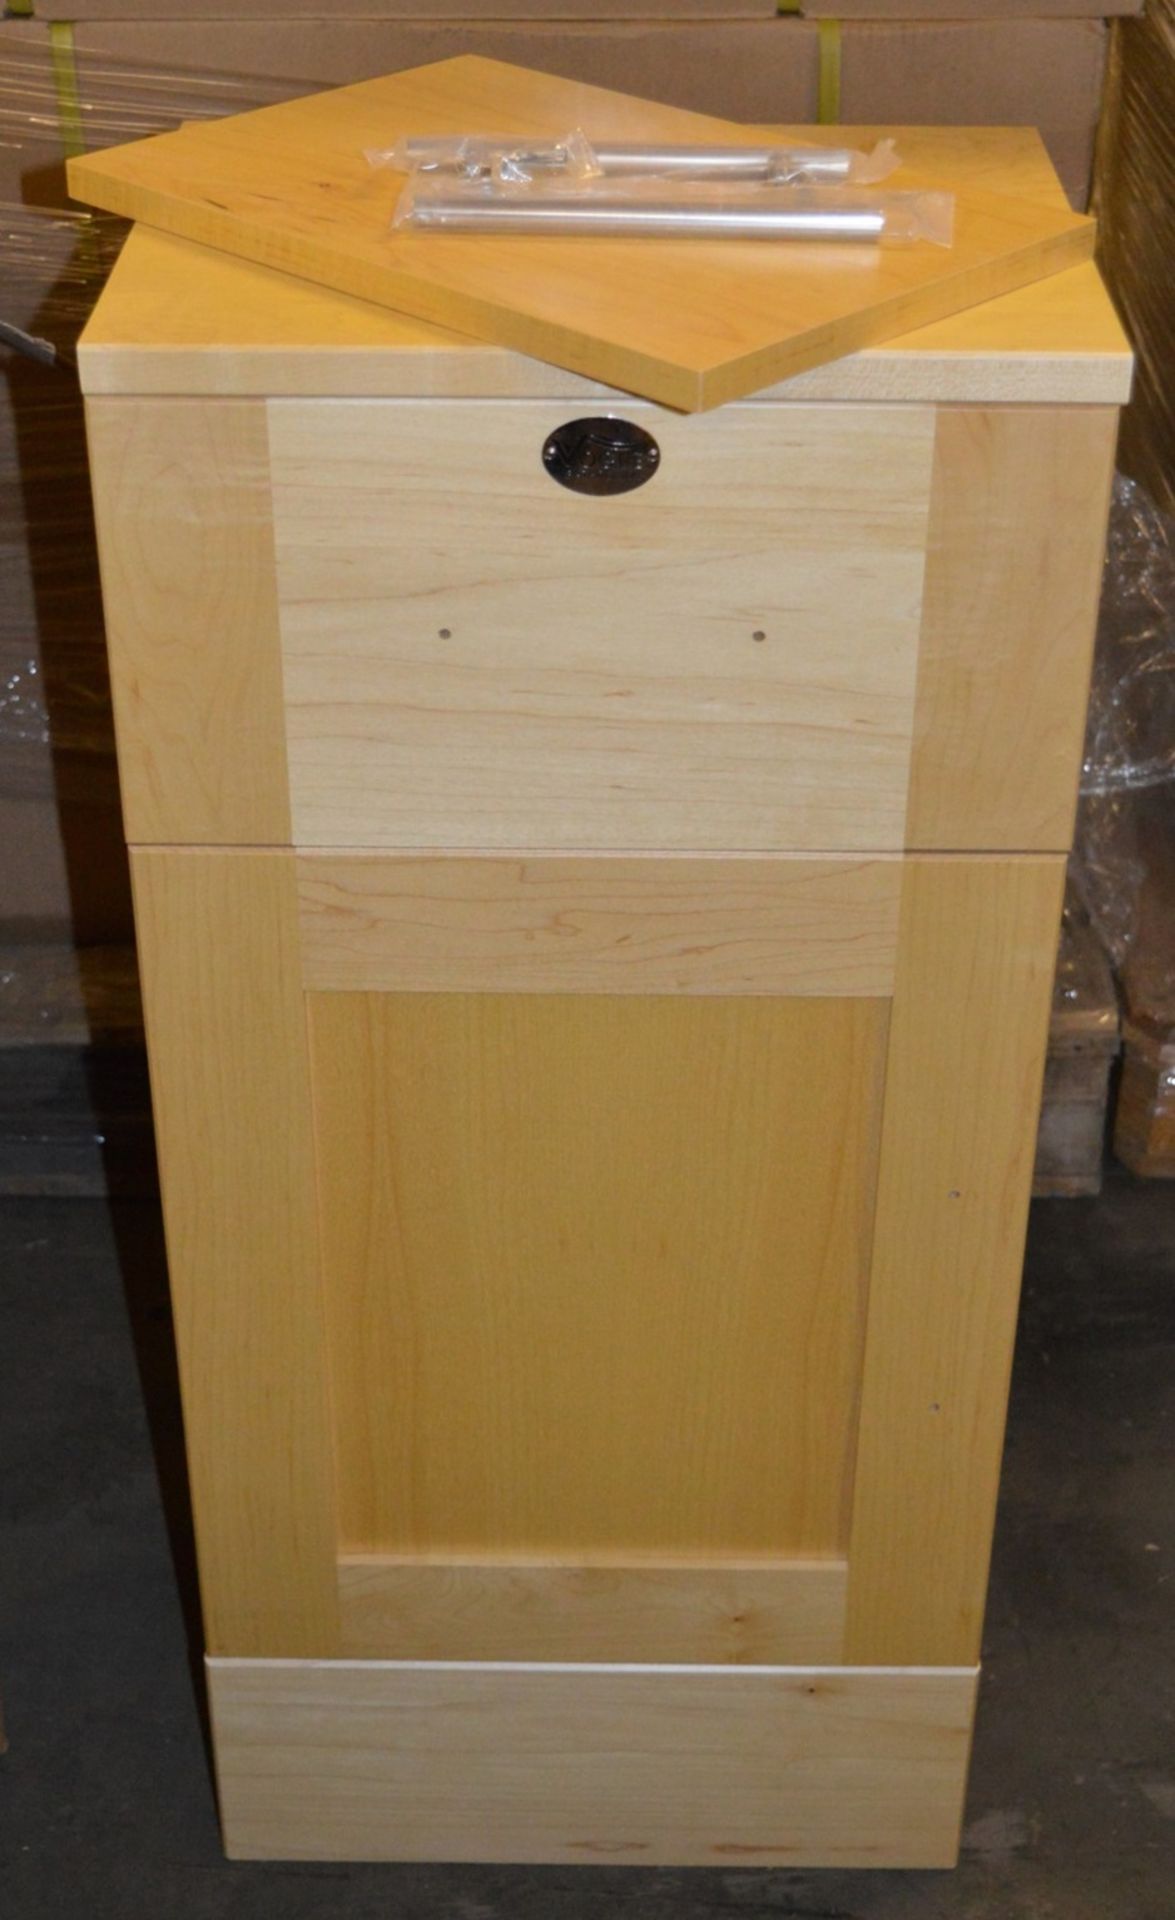 1 x Vogue Bathrooms KUDOS Bathroom Storage Cabinet - 400mm Width - Maple Shaker Style - CL034 - - Image 3 of 7